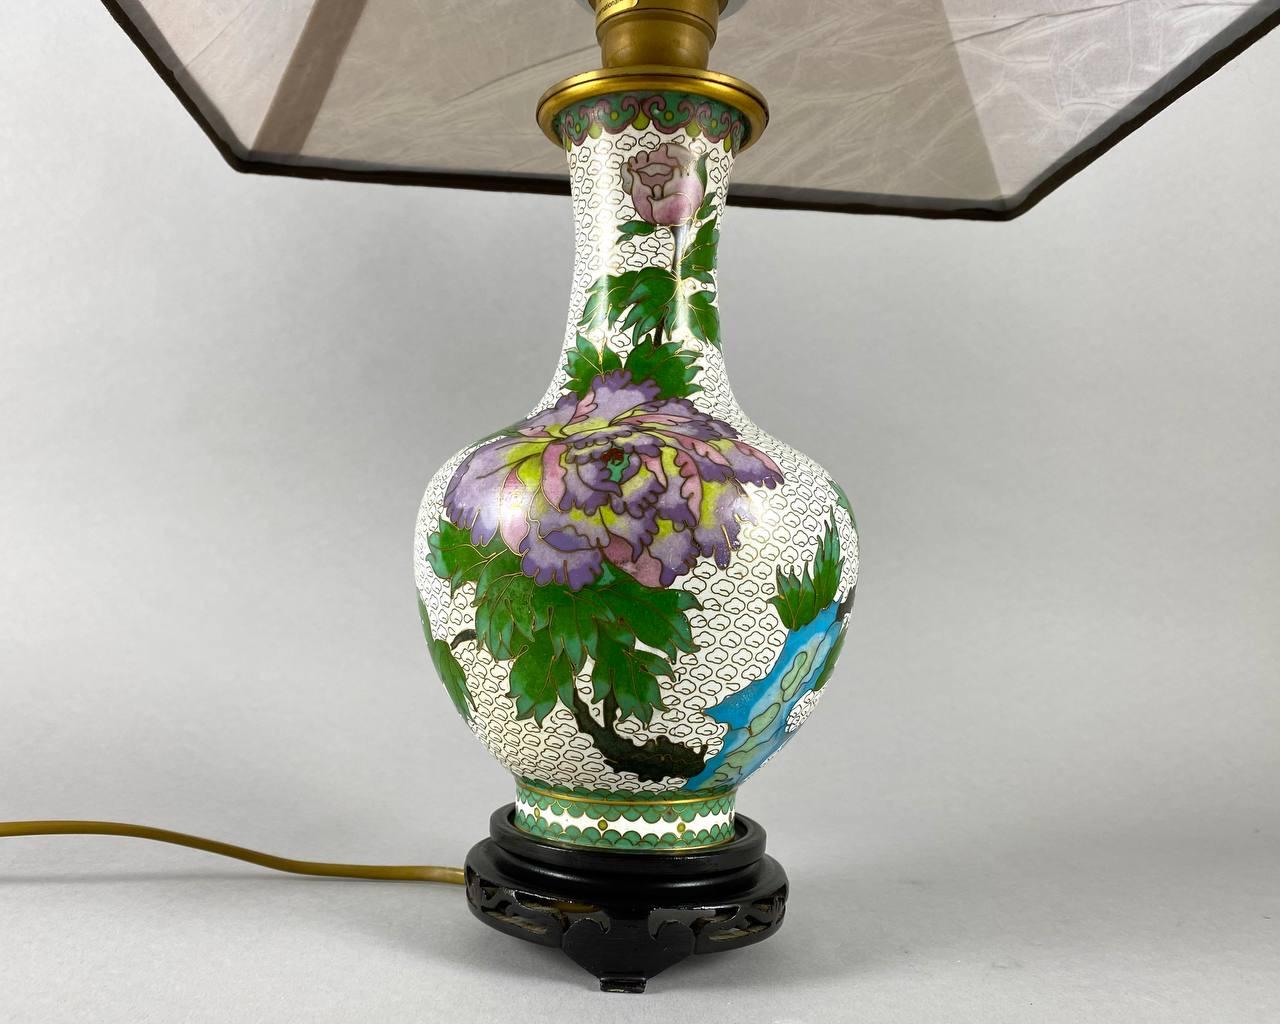 A vintage Chinese table lamp. circa 1970s, made of metal, enamel, textiles, decorative painting.

The base of the lamp is made in the form of a vase with a high, narrow neck. The base and neck of the vase are decorated with peonies made in